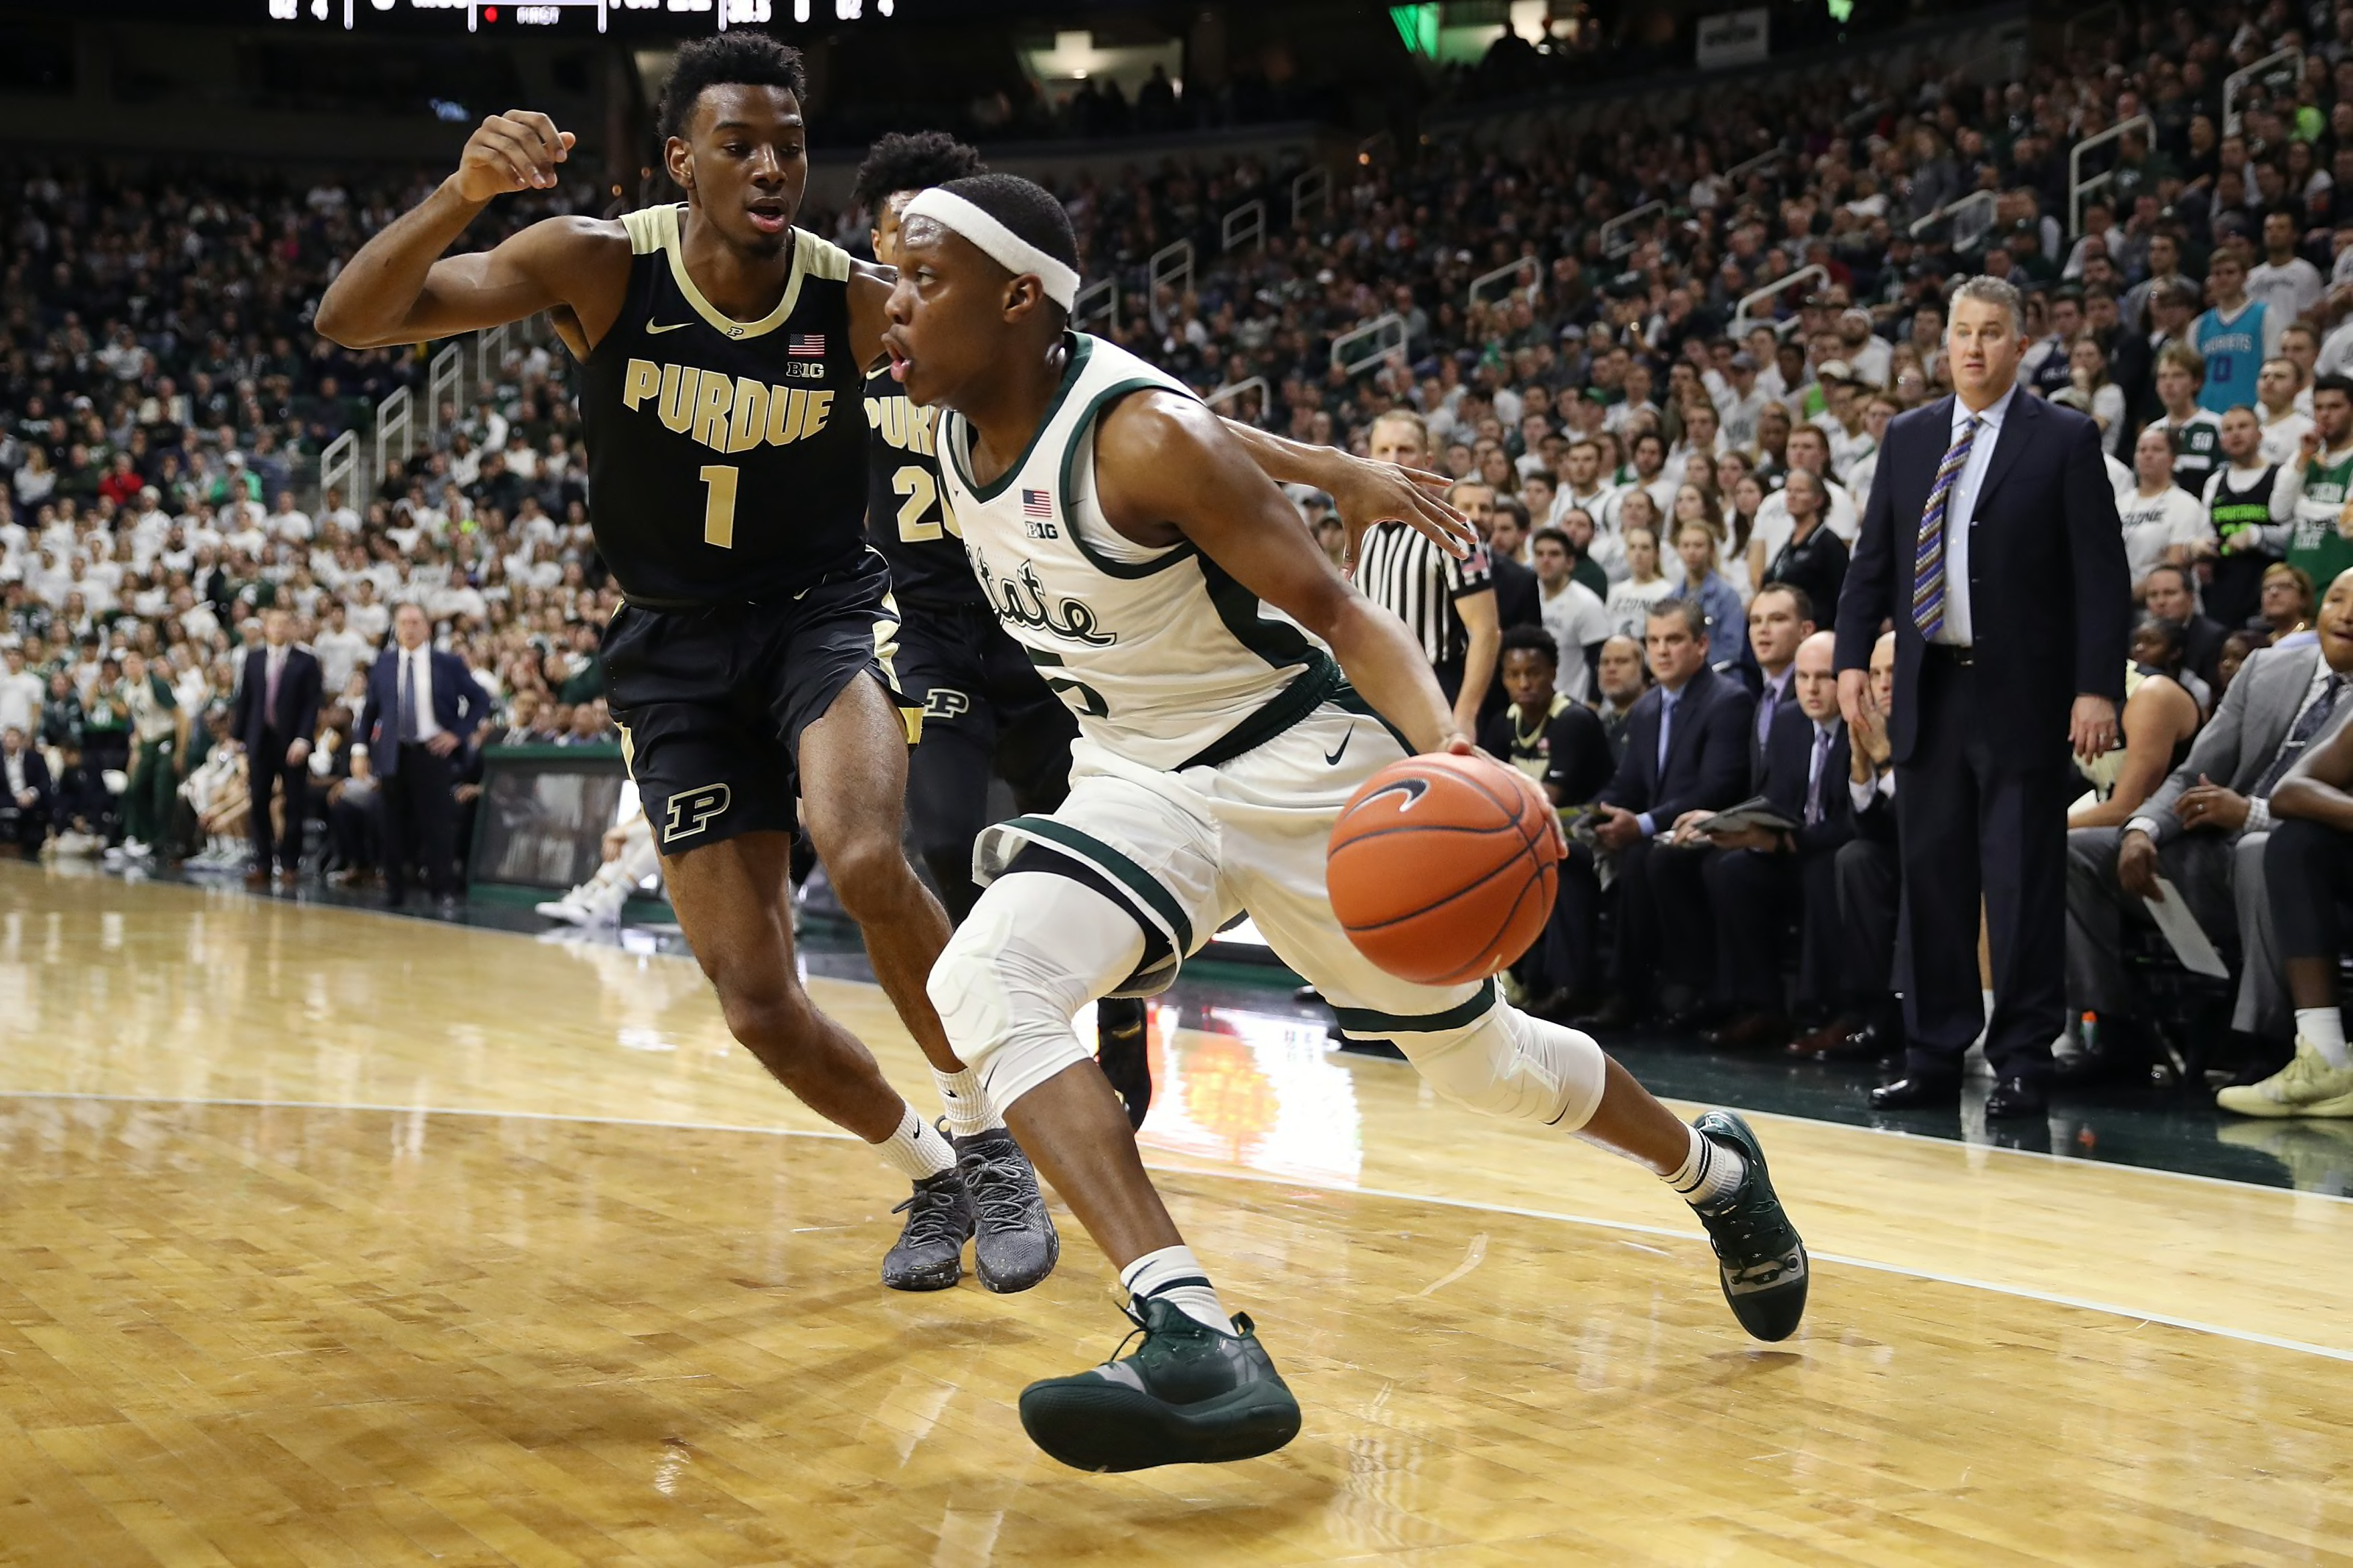 Michigan State Basketball: 2018-19 keys for Spartans at Purdue